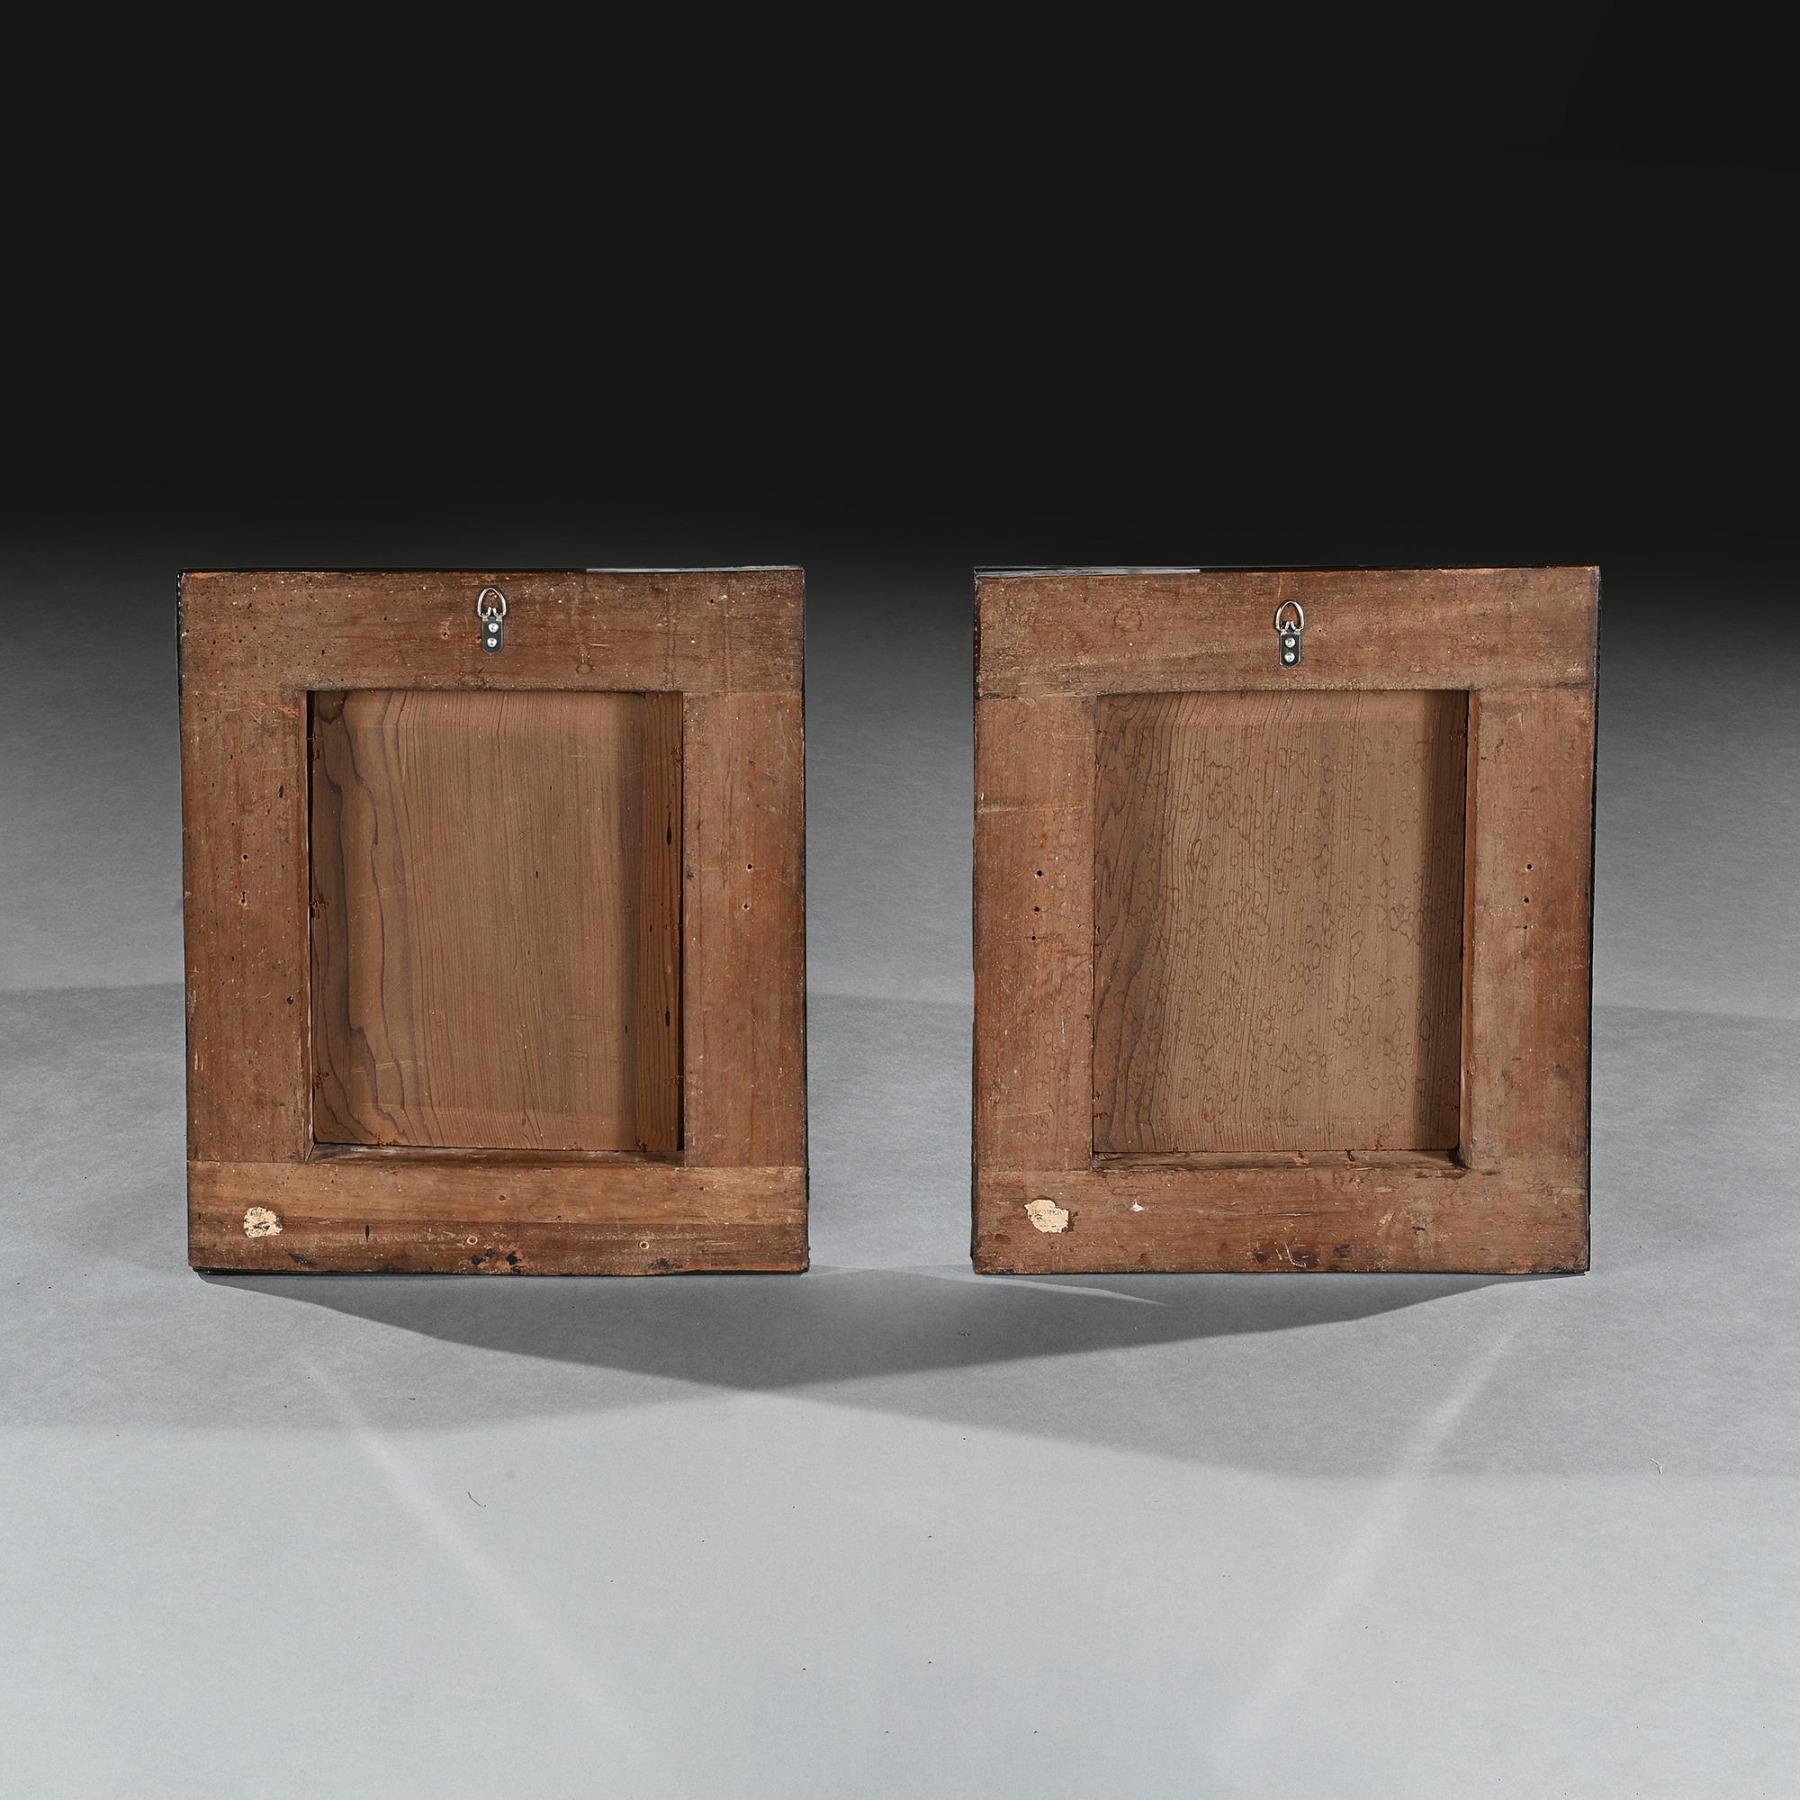 A Rare and Unusual Pair of 18th Century Spanish Colonial 'Enconchado' Mirrors Veneered in Tortoiseshell and Inlaid With Bone and Mother of Pearl Made in Lima (Peru) or Mexico 

Circa 1720

Provenance

One of the mirrors with a fragmentary label